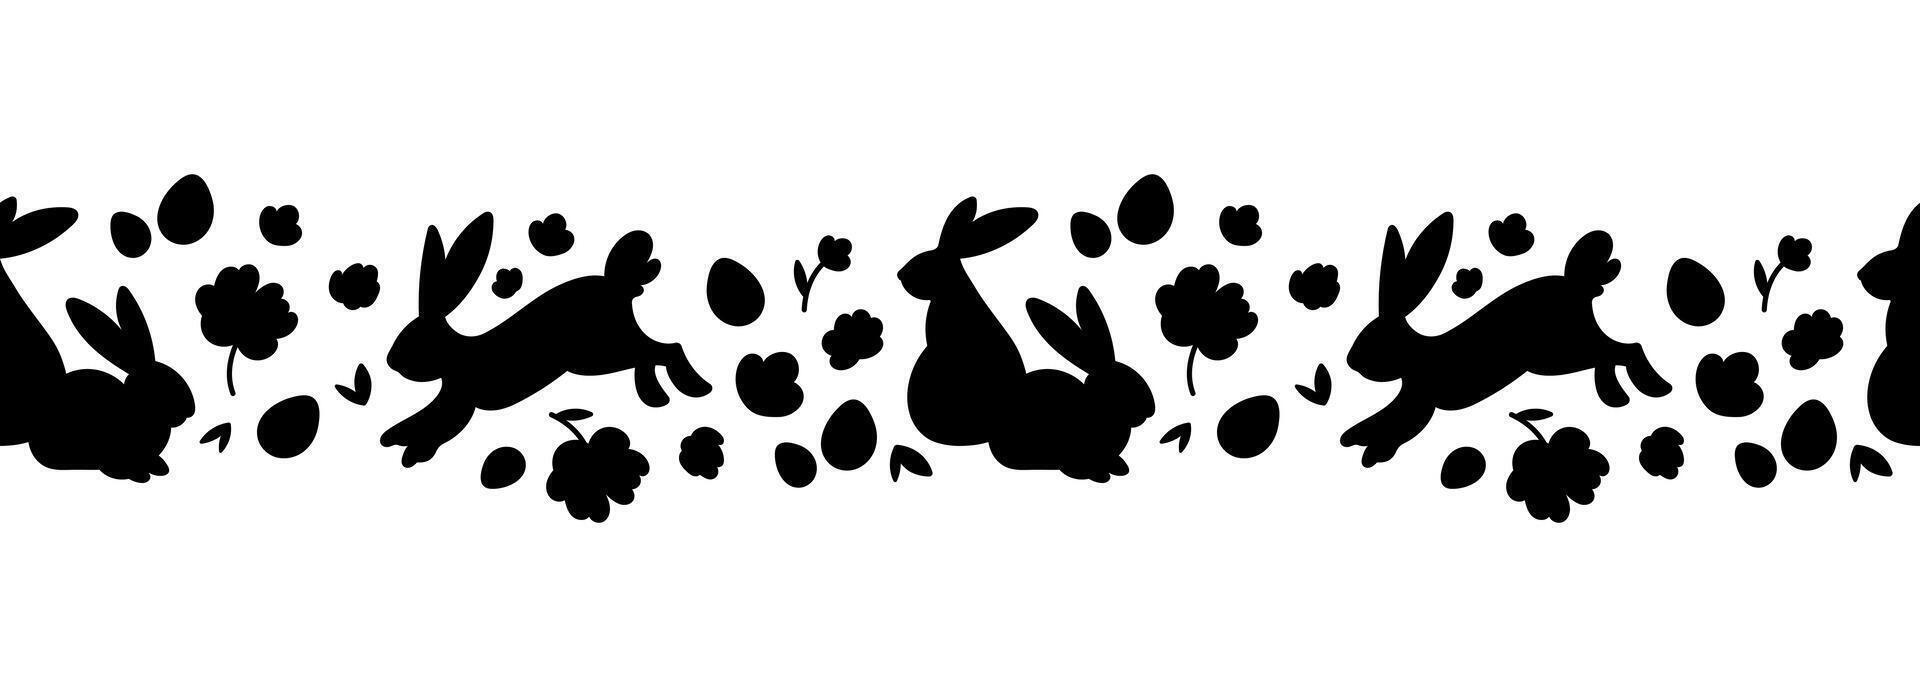 Lovely handmade Easter horizontal seamless pattern. Cute doodles. Silhouettes of rabbits, flowers, Easter eggs. Suitable for textiles, banners, wallpapers, packaging - vector design